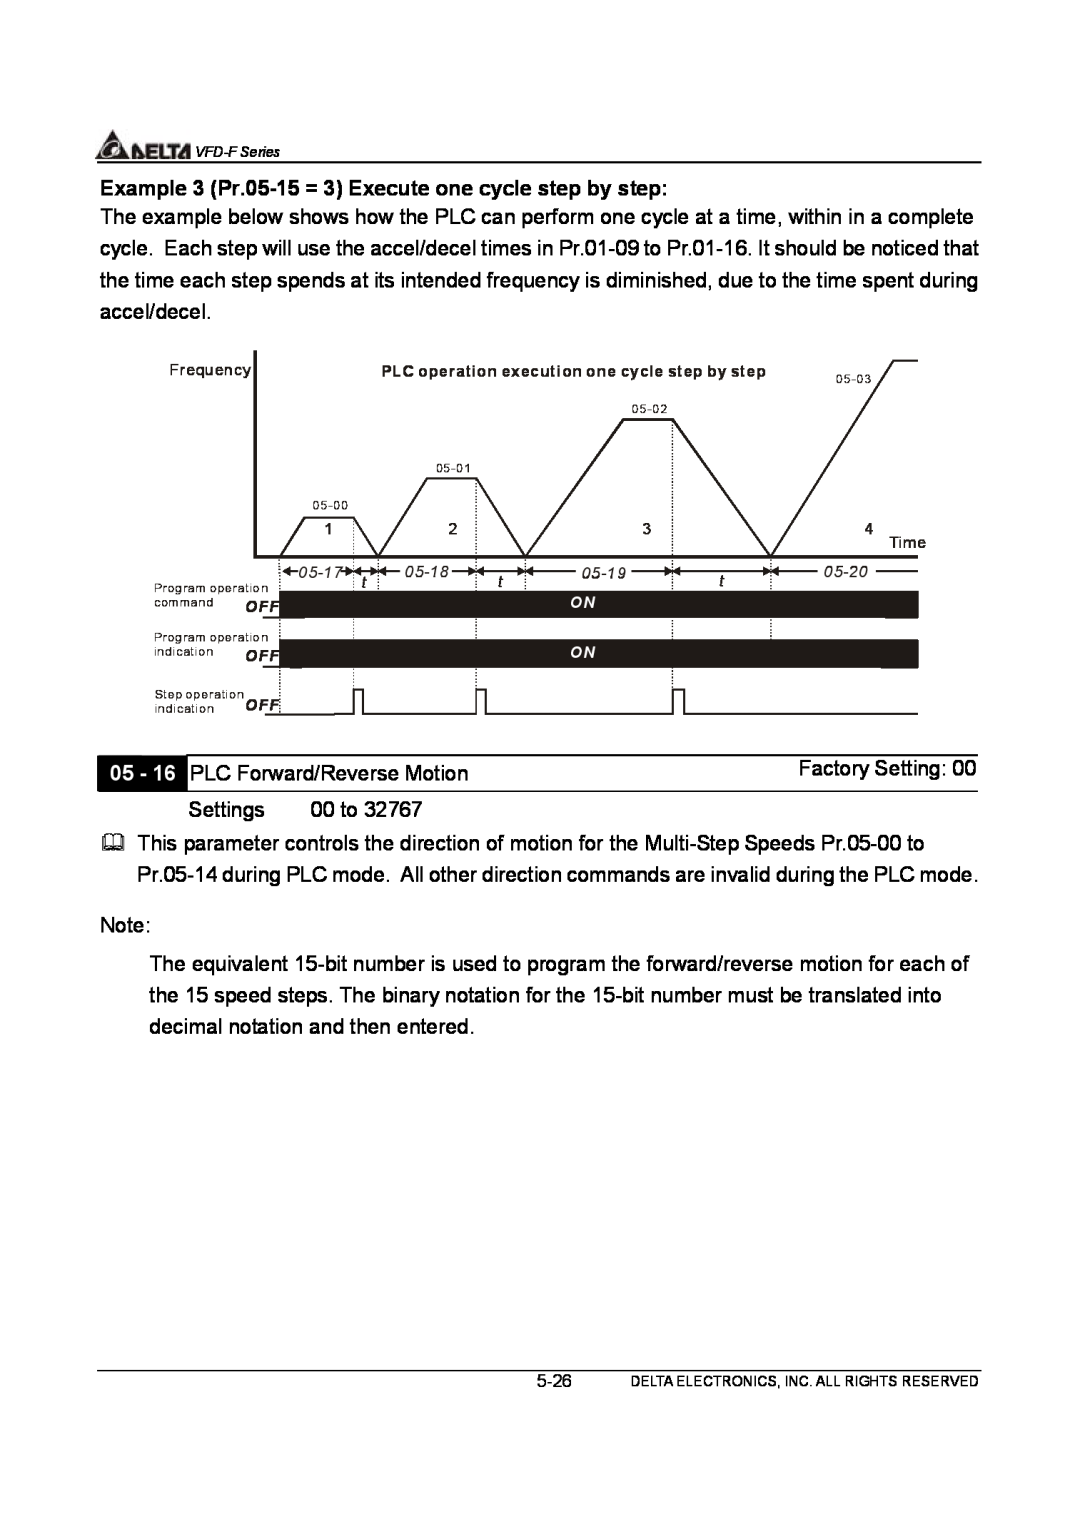 Delta Electronics VFD-F Series manual Example 3 Pr.05-15 = 3 Execute one cycle step by step 